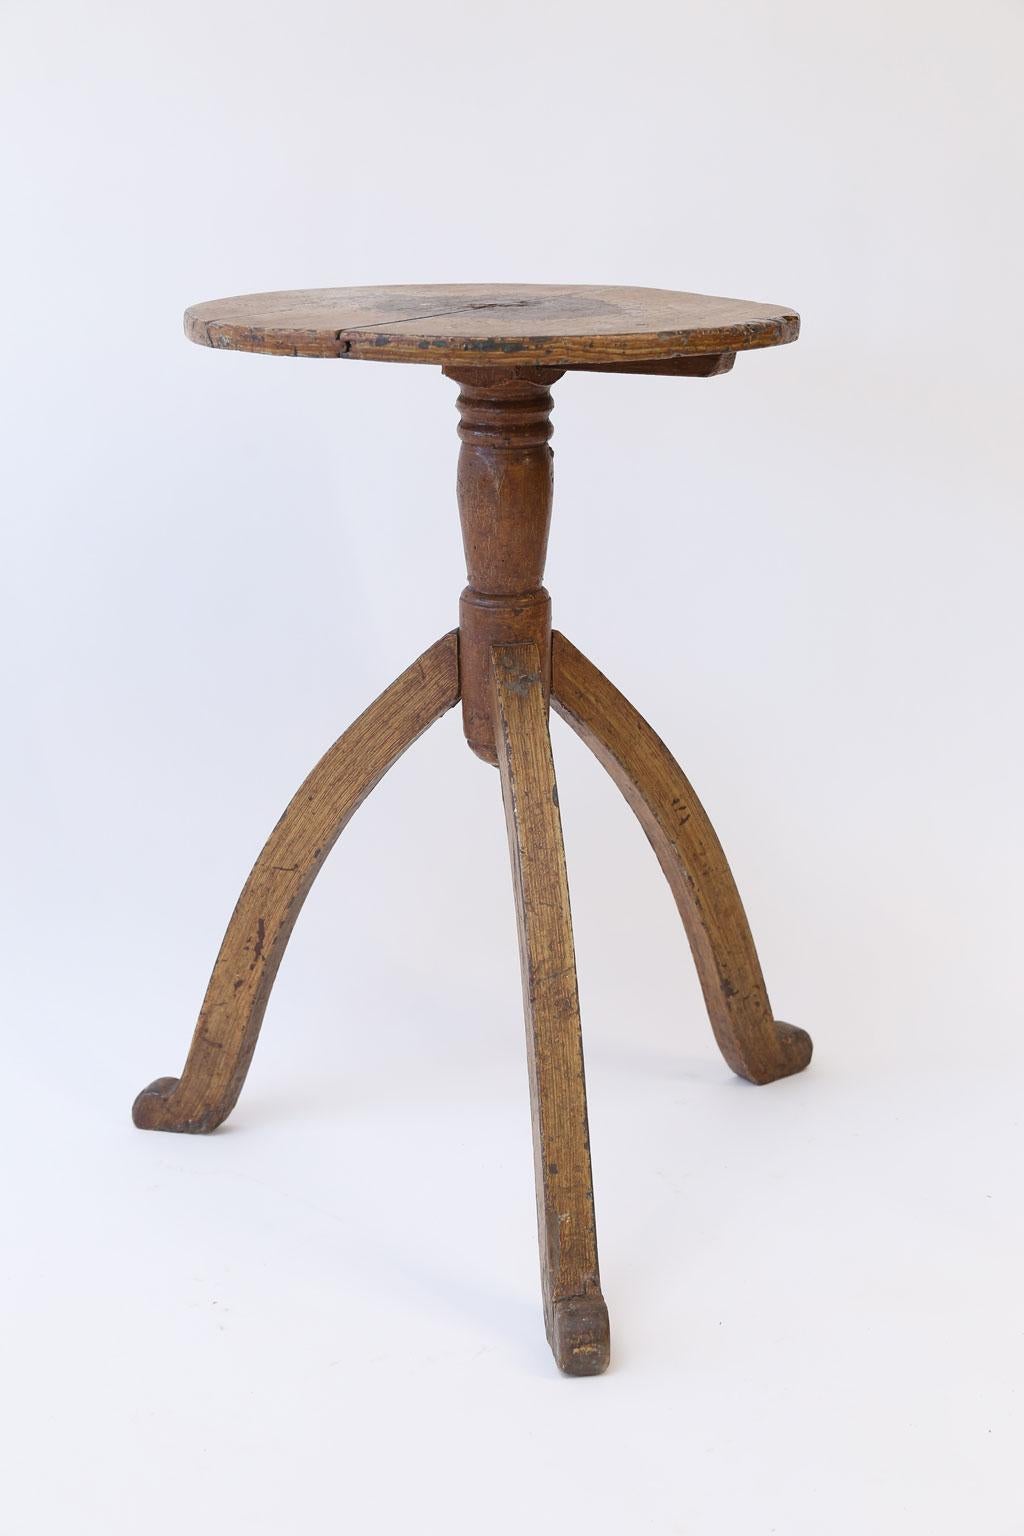 Hand-Carved Quirky Swedish Folk Art Table